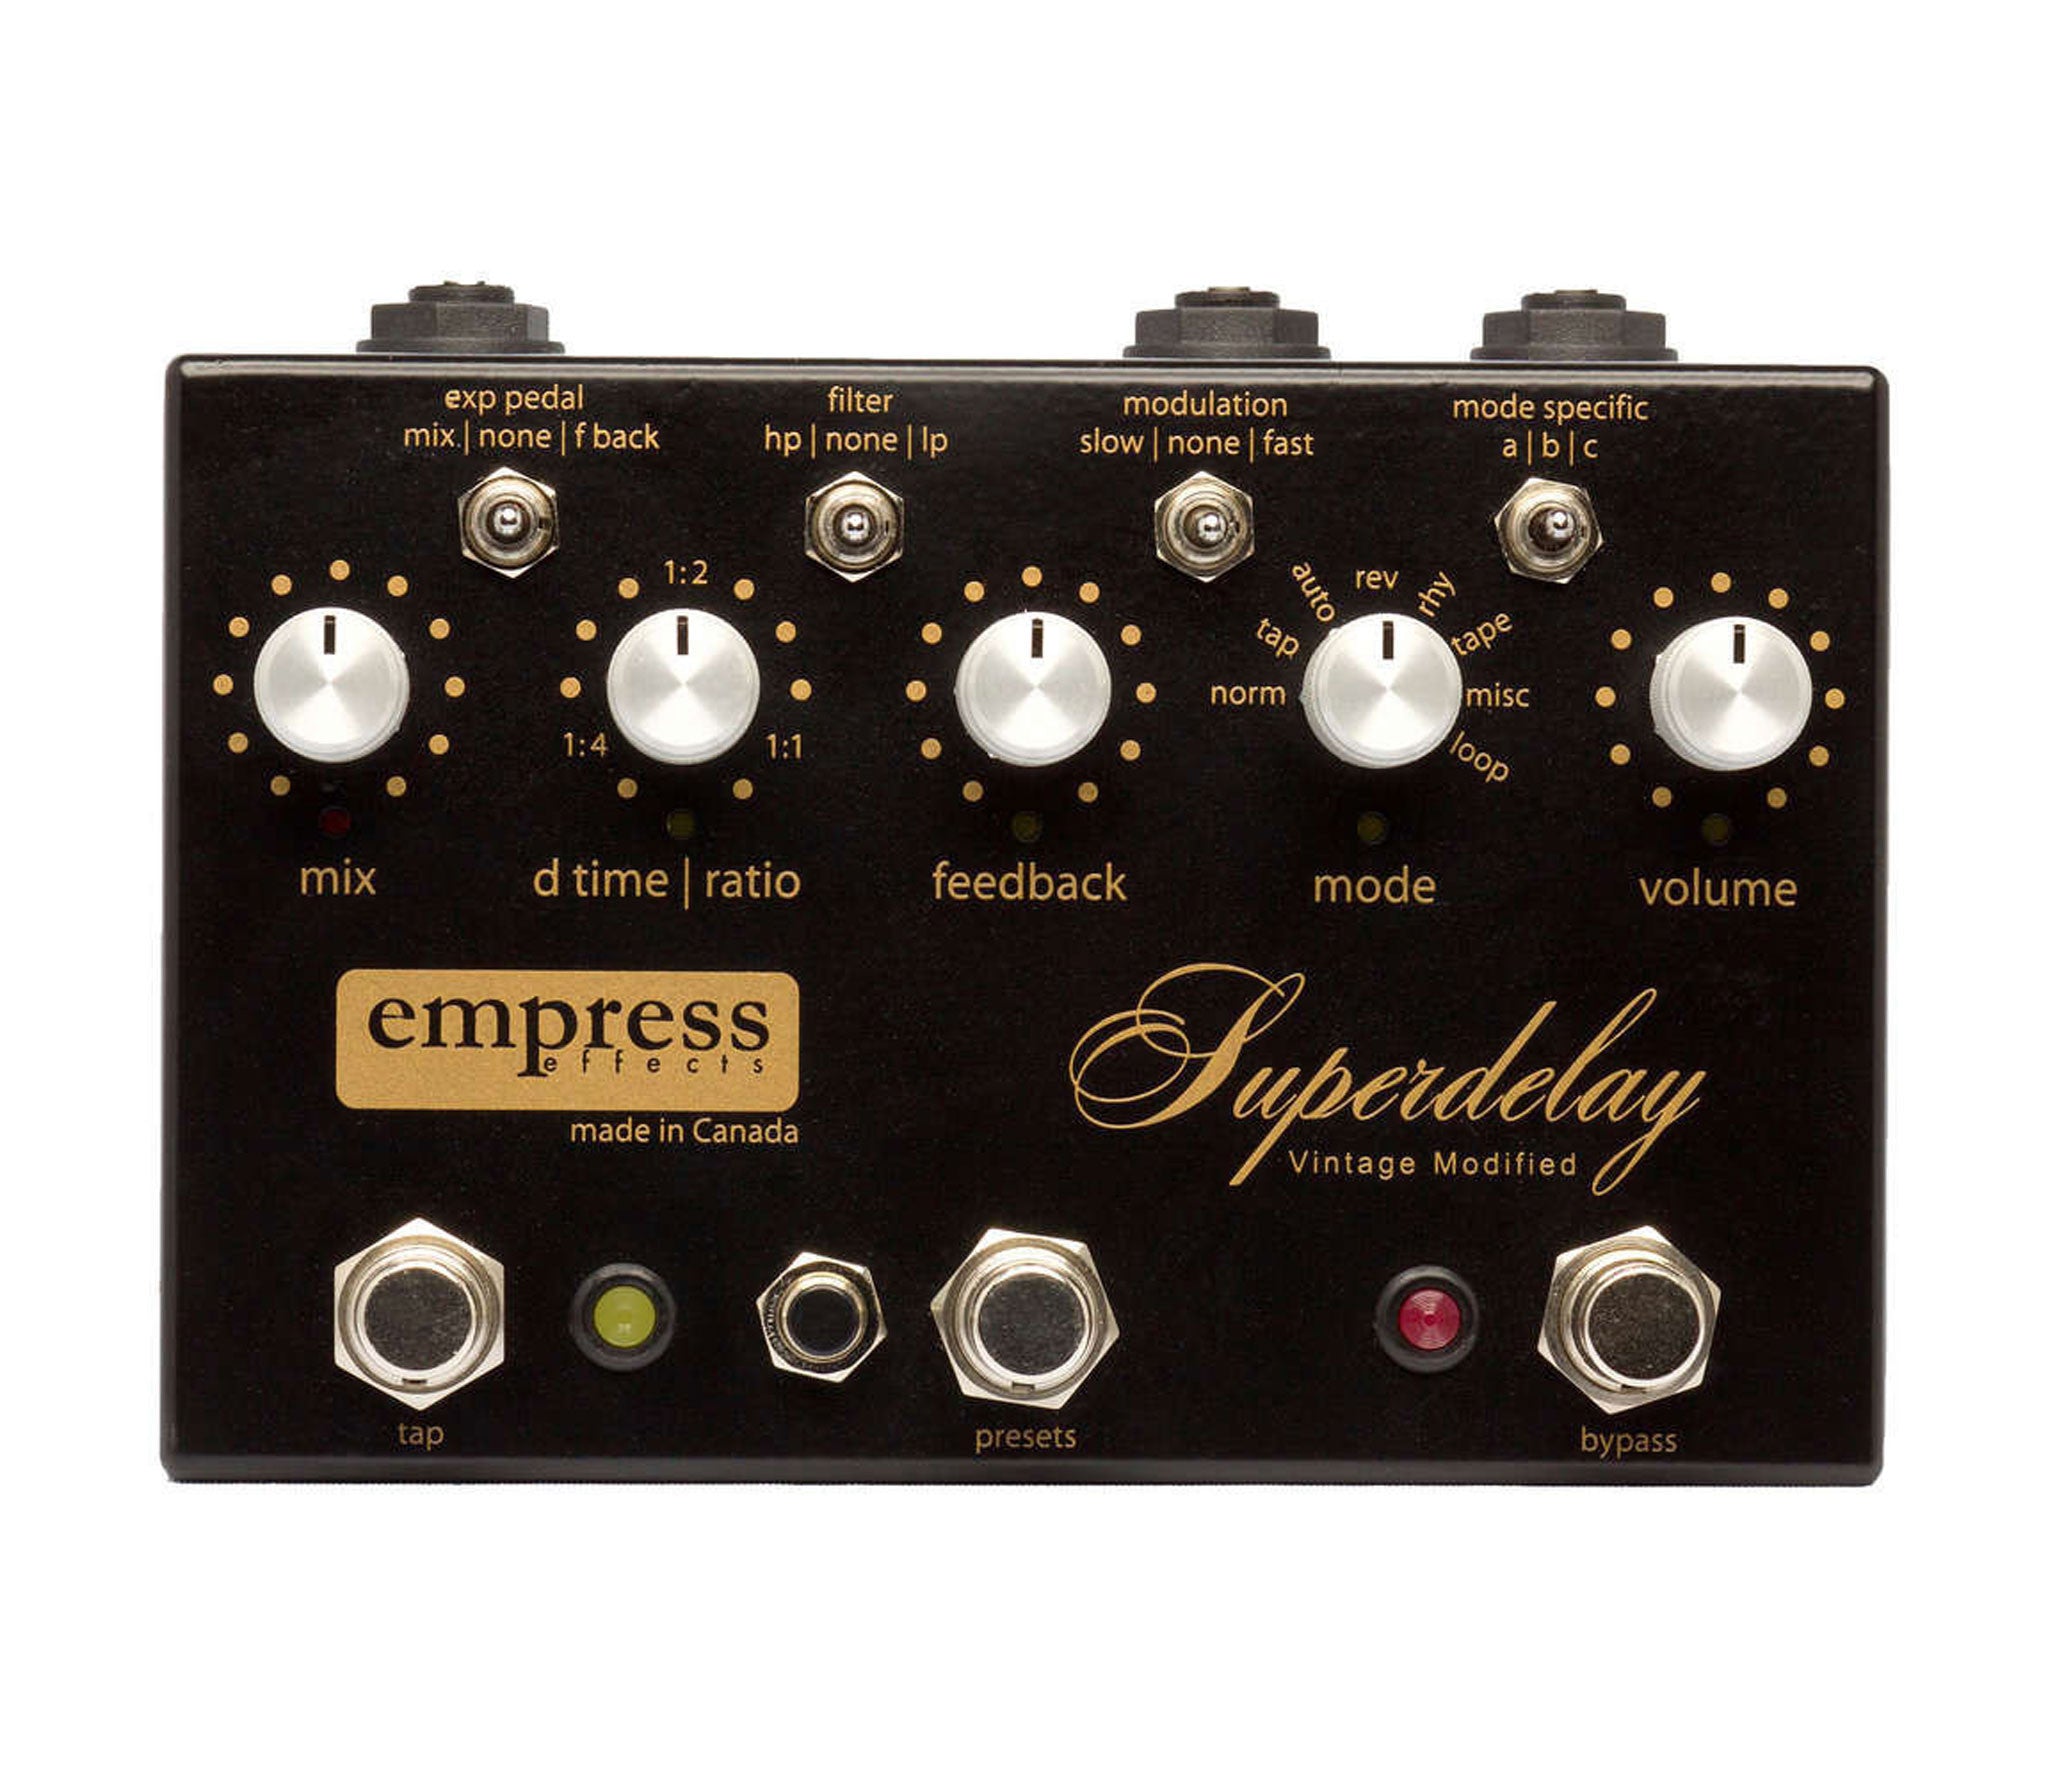 Empress Effects Vintage Modified Superdelay Pedal Mass Street Music